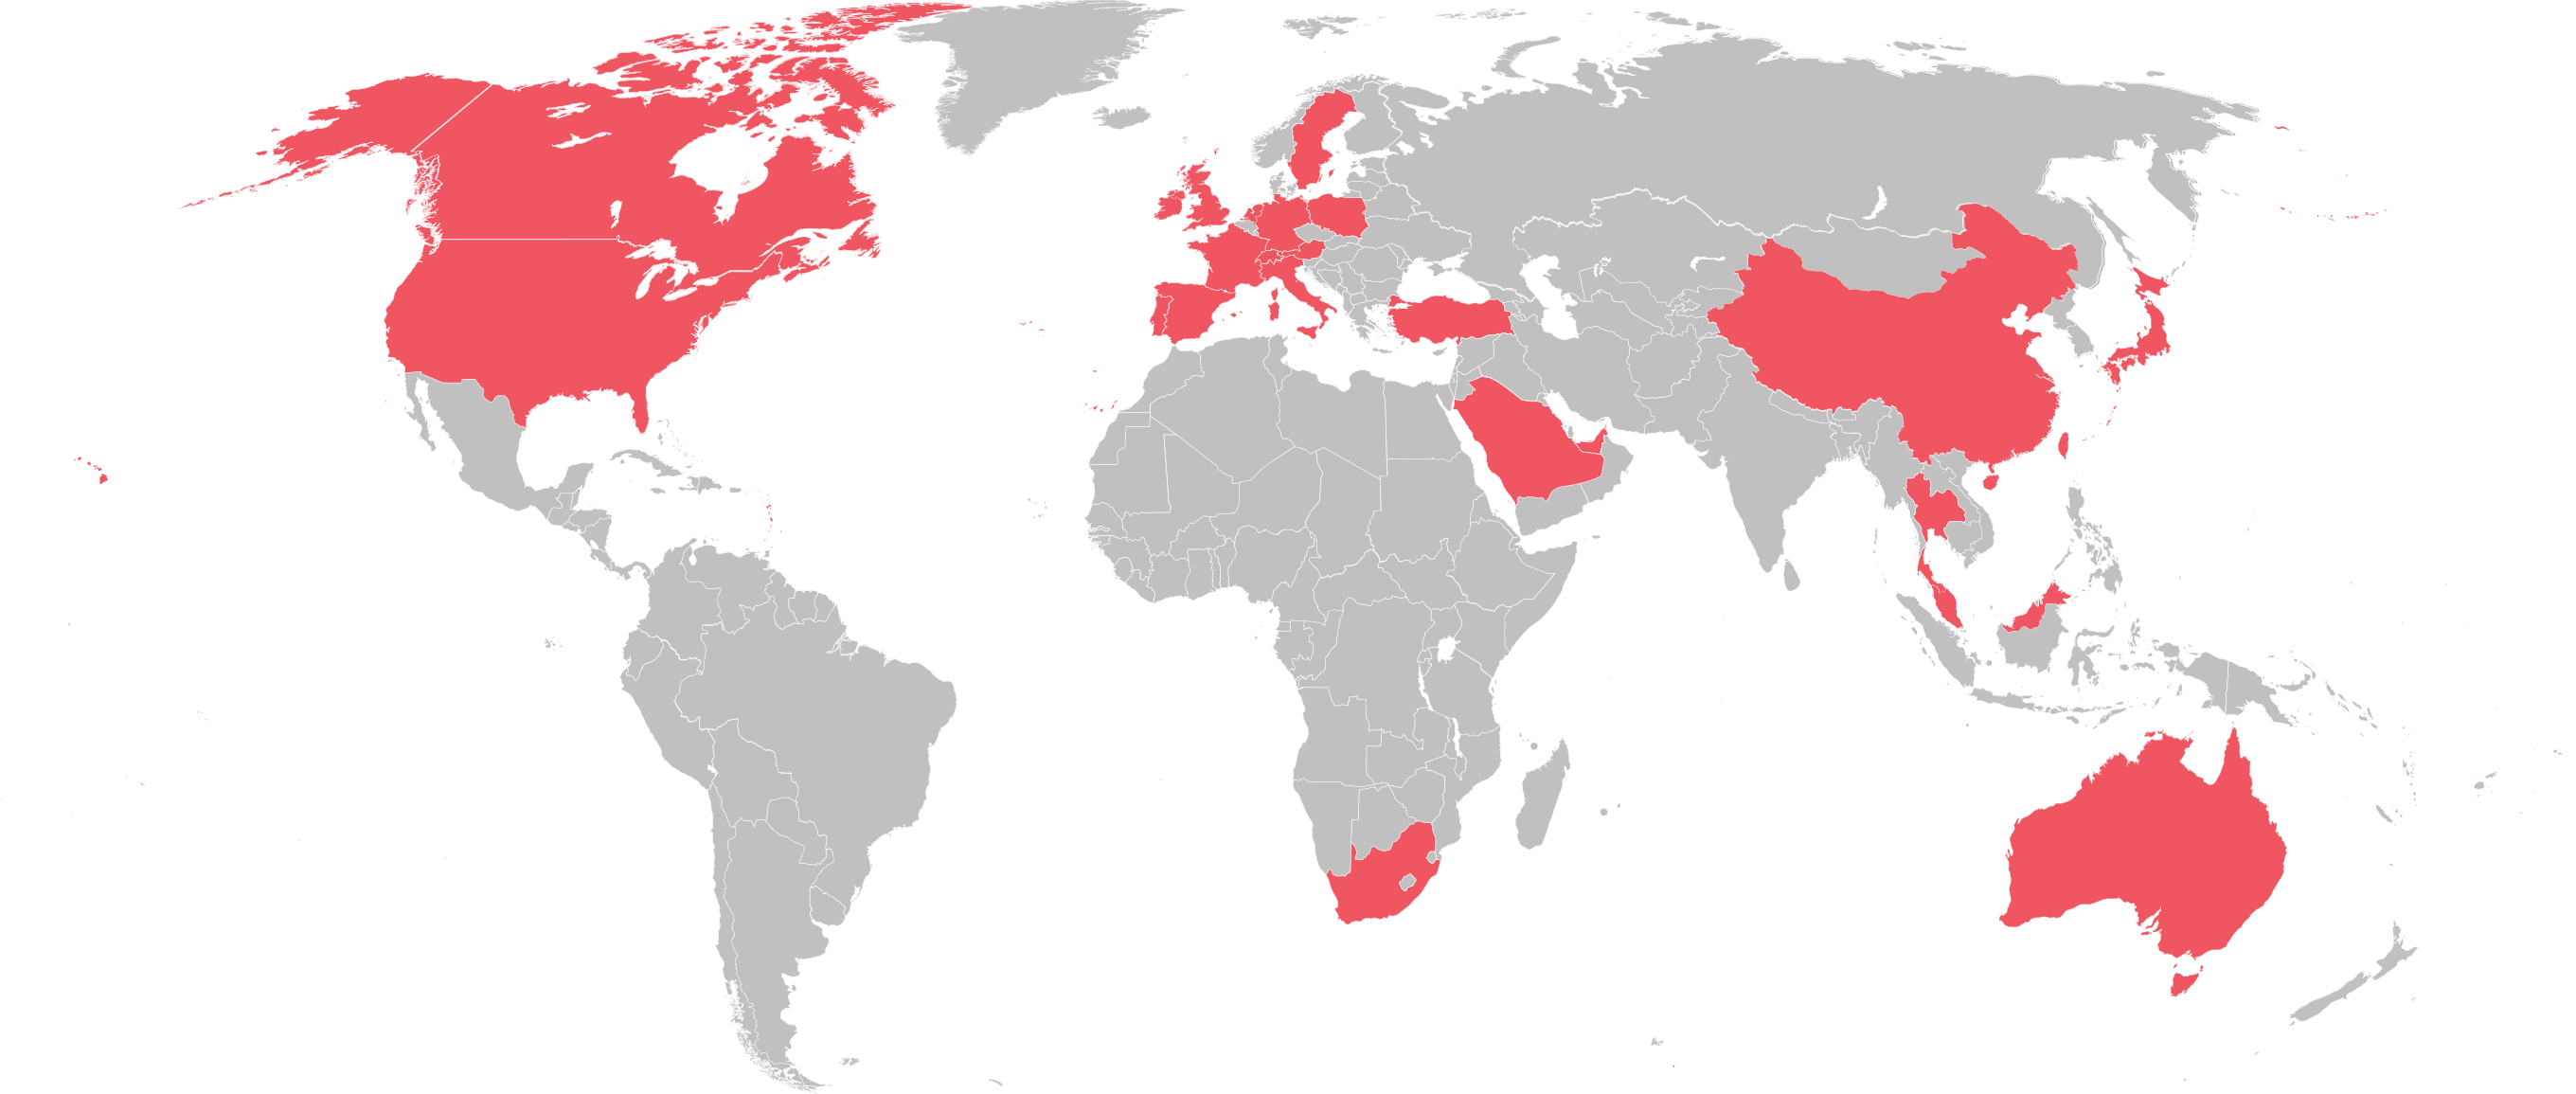 A map showing how City to City rides are available in countries around the world.